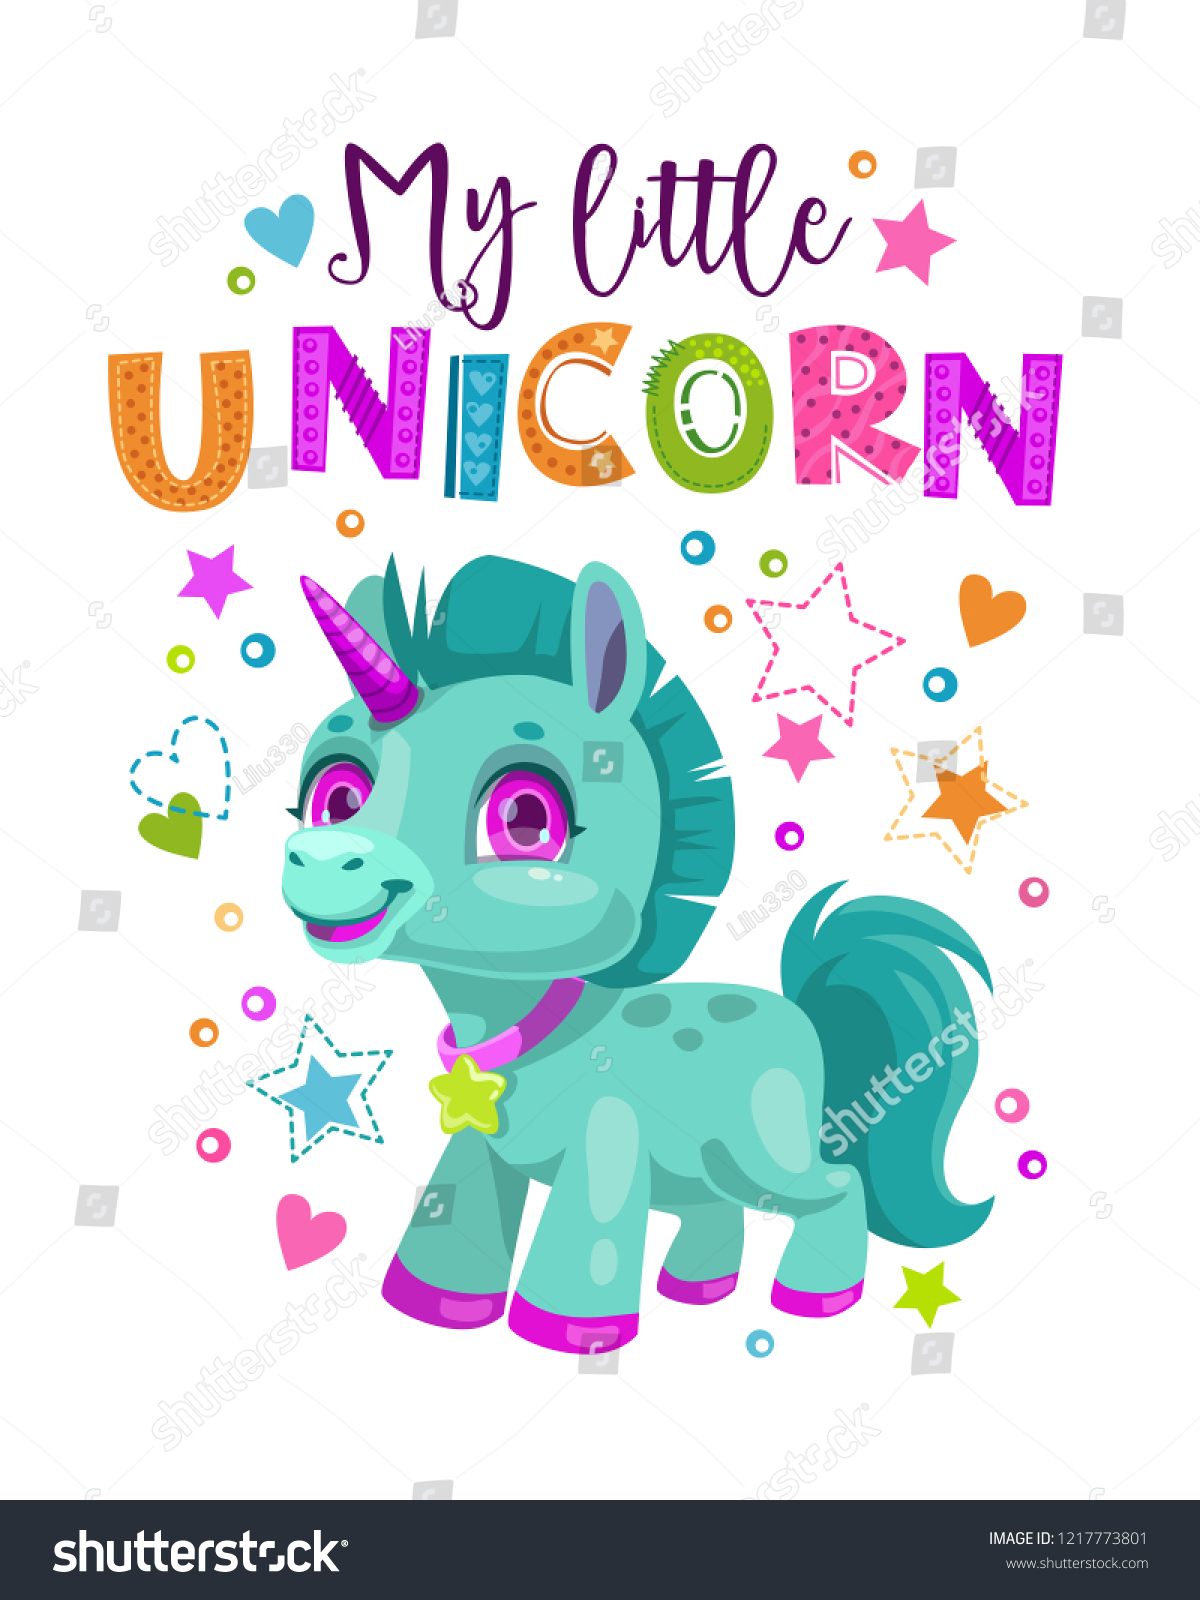 SVG of My little unicorn. Decorative poster with funny fantasy pony and trendy slogan. Cute childish print for t shirt design. Beautiful girlish vector illustration. svg